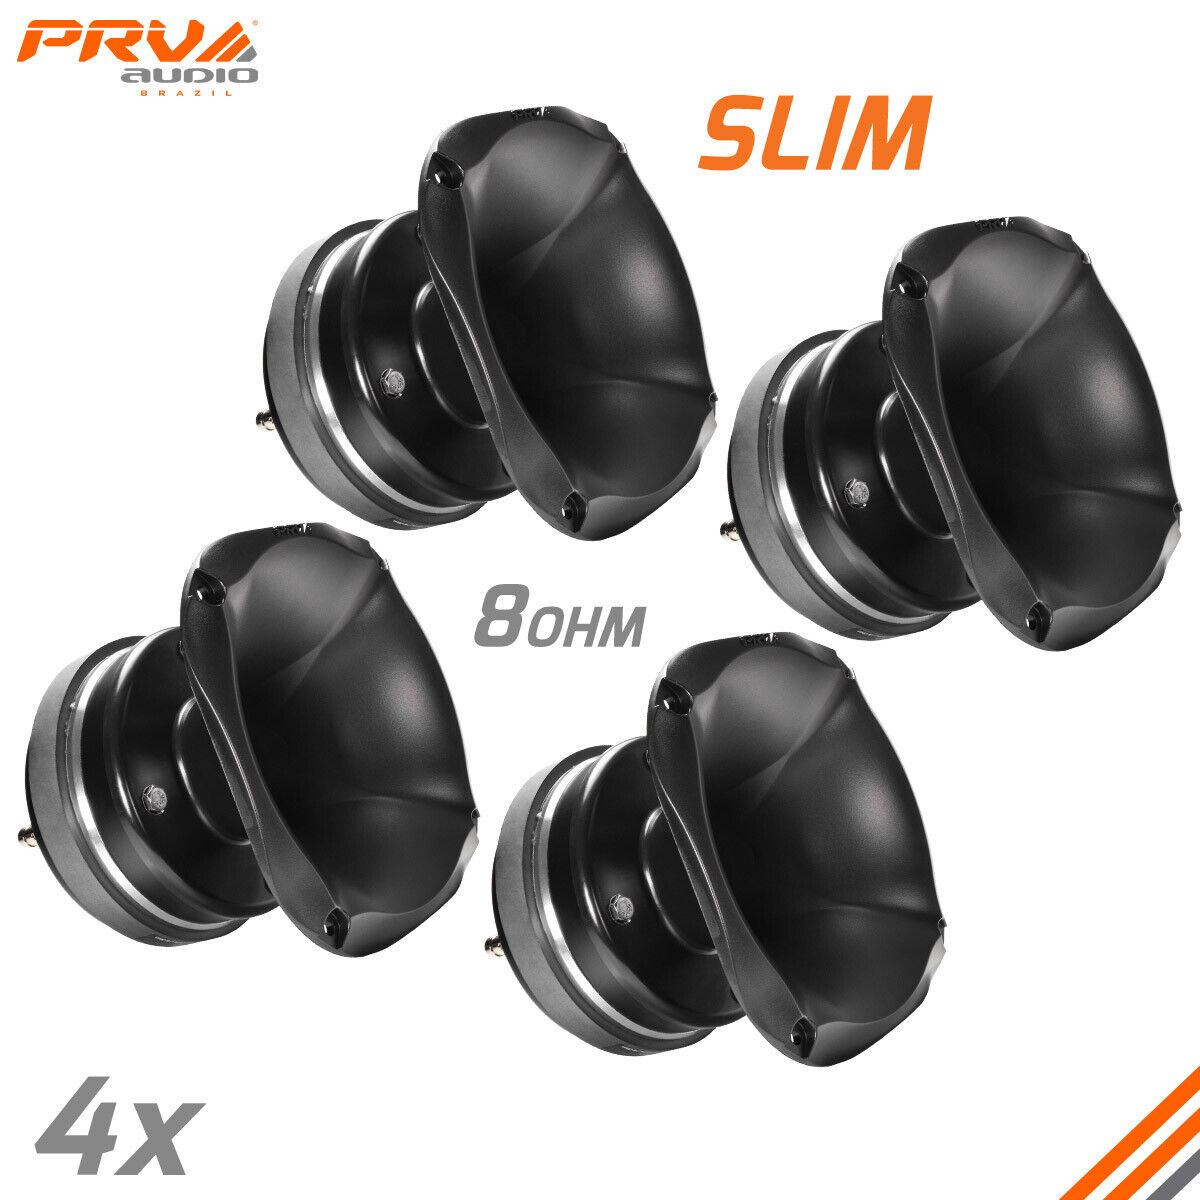 4x PRV 2″ Horn Driver WG2000Py SLIM Shallow Mount High Frequency 8 Ohm 600 Watts